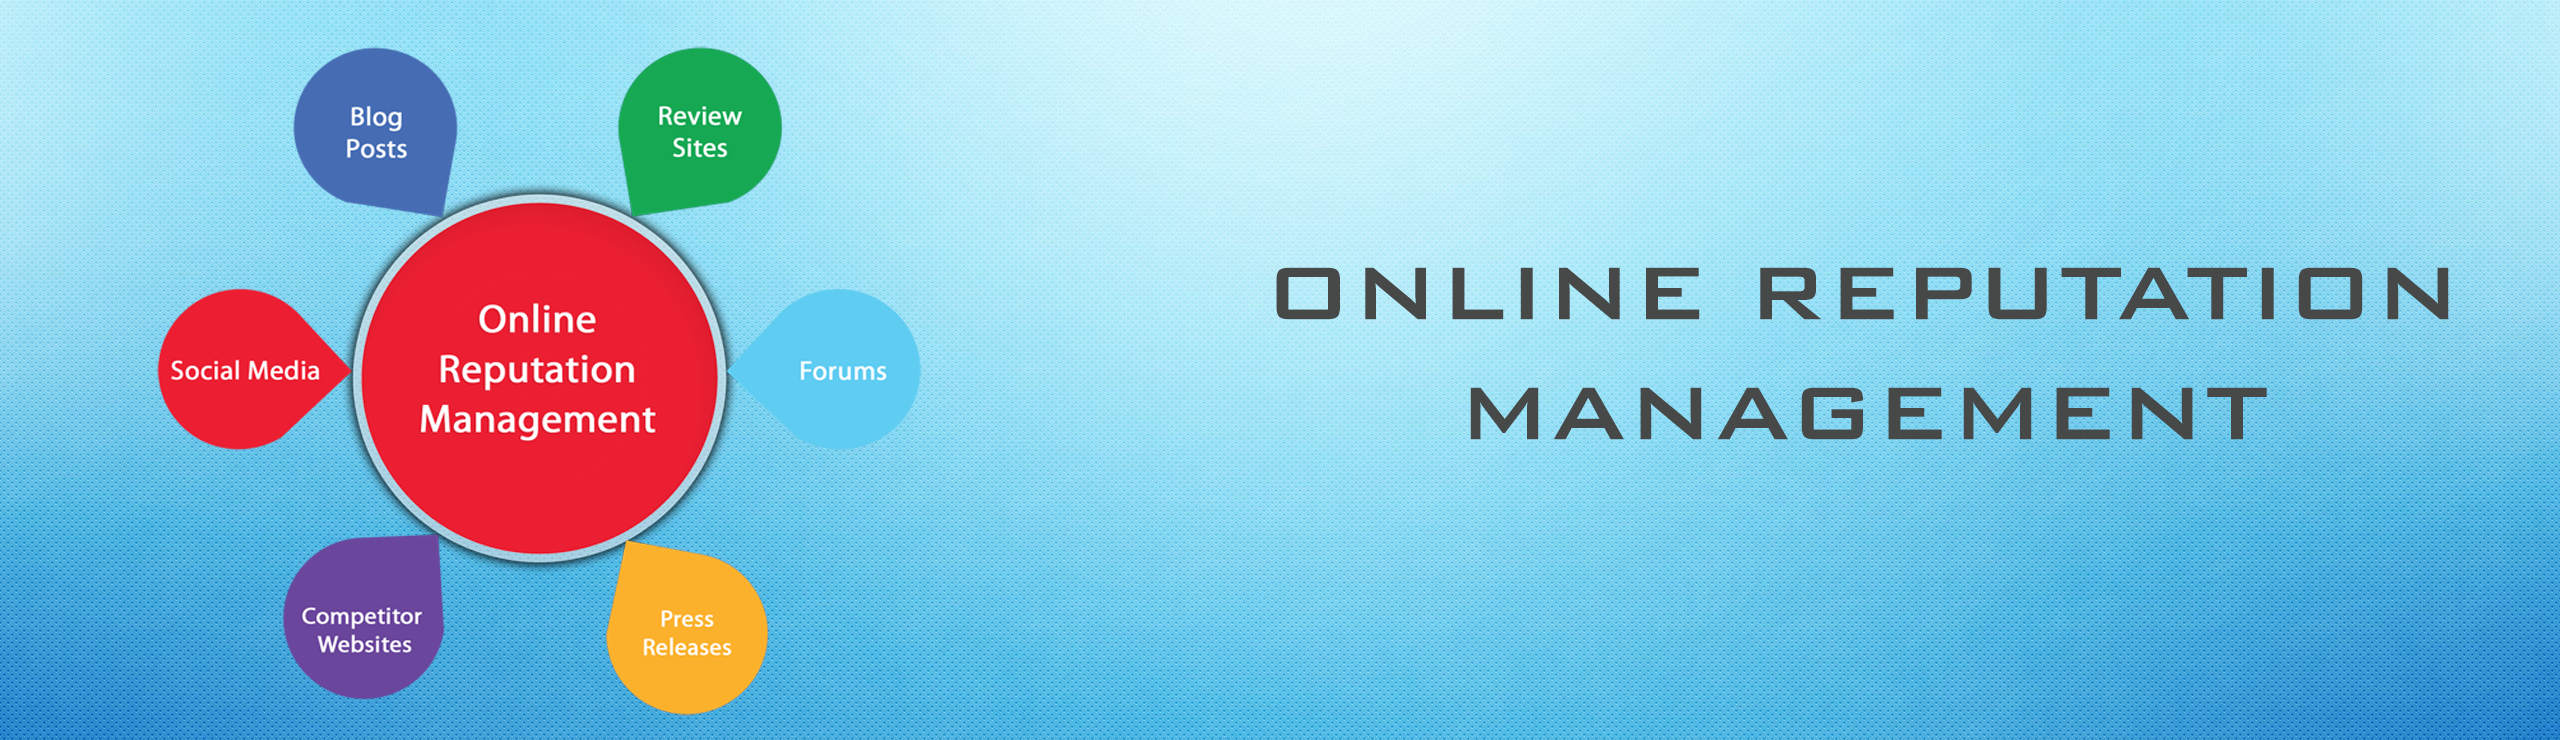 Orm Online Reputation Services By Digital Marketing